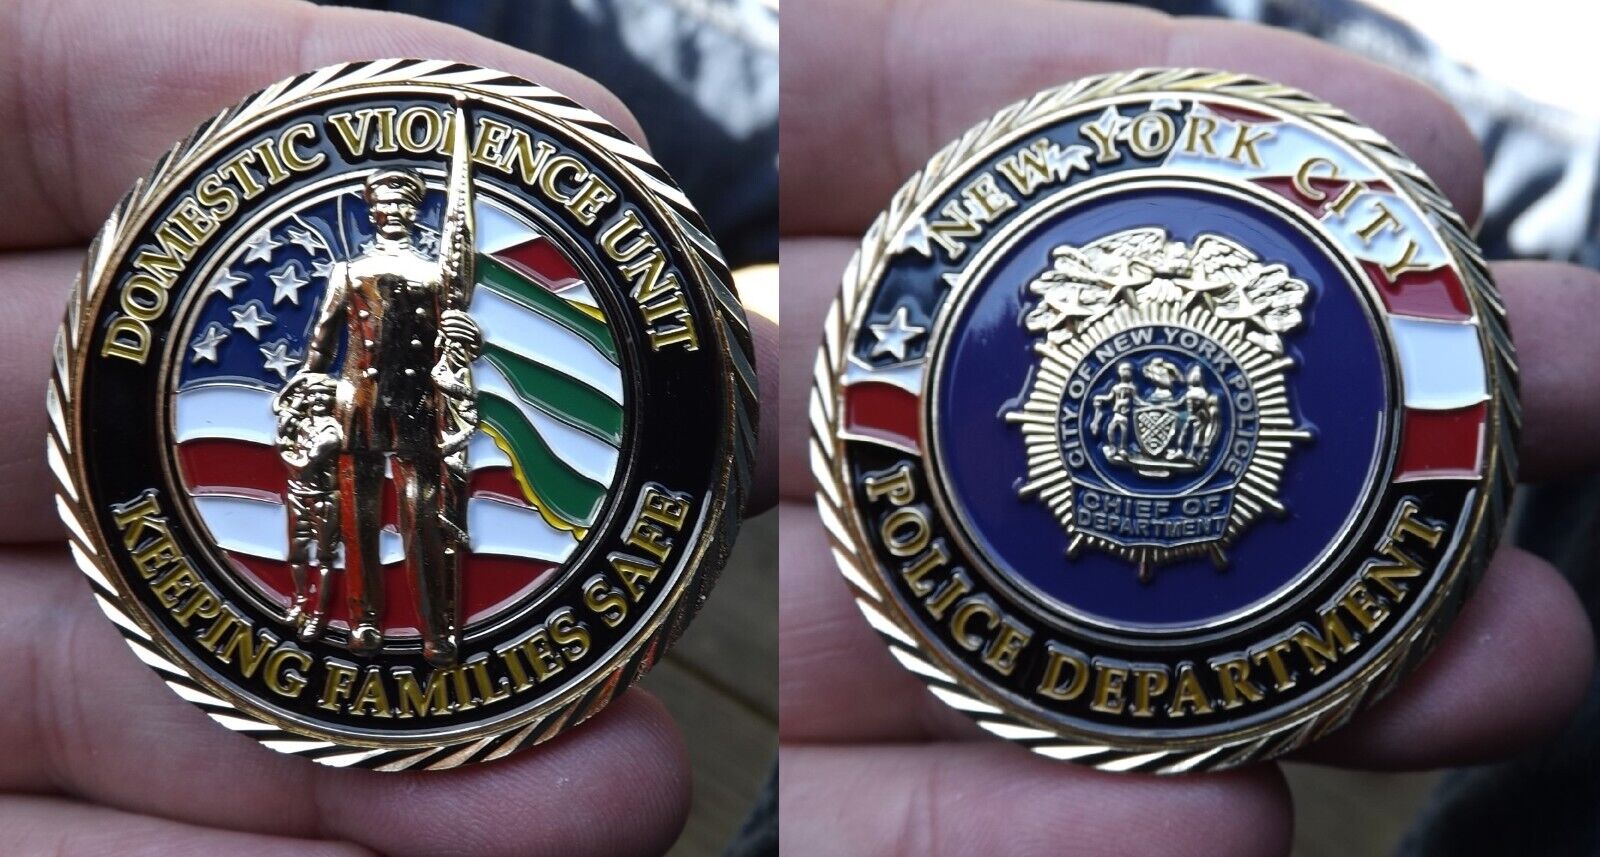 NYPD Domestic Violence Unit Police Department Challenge Coin